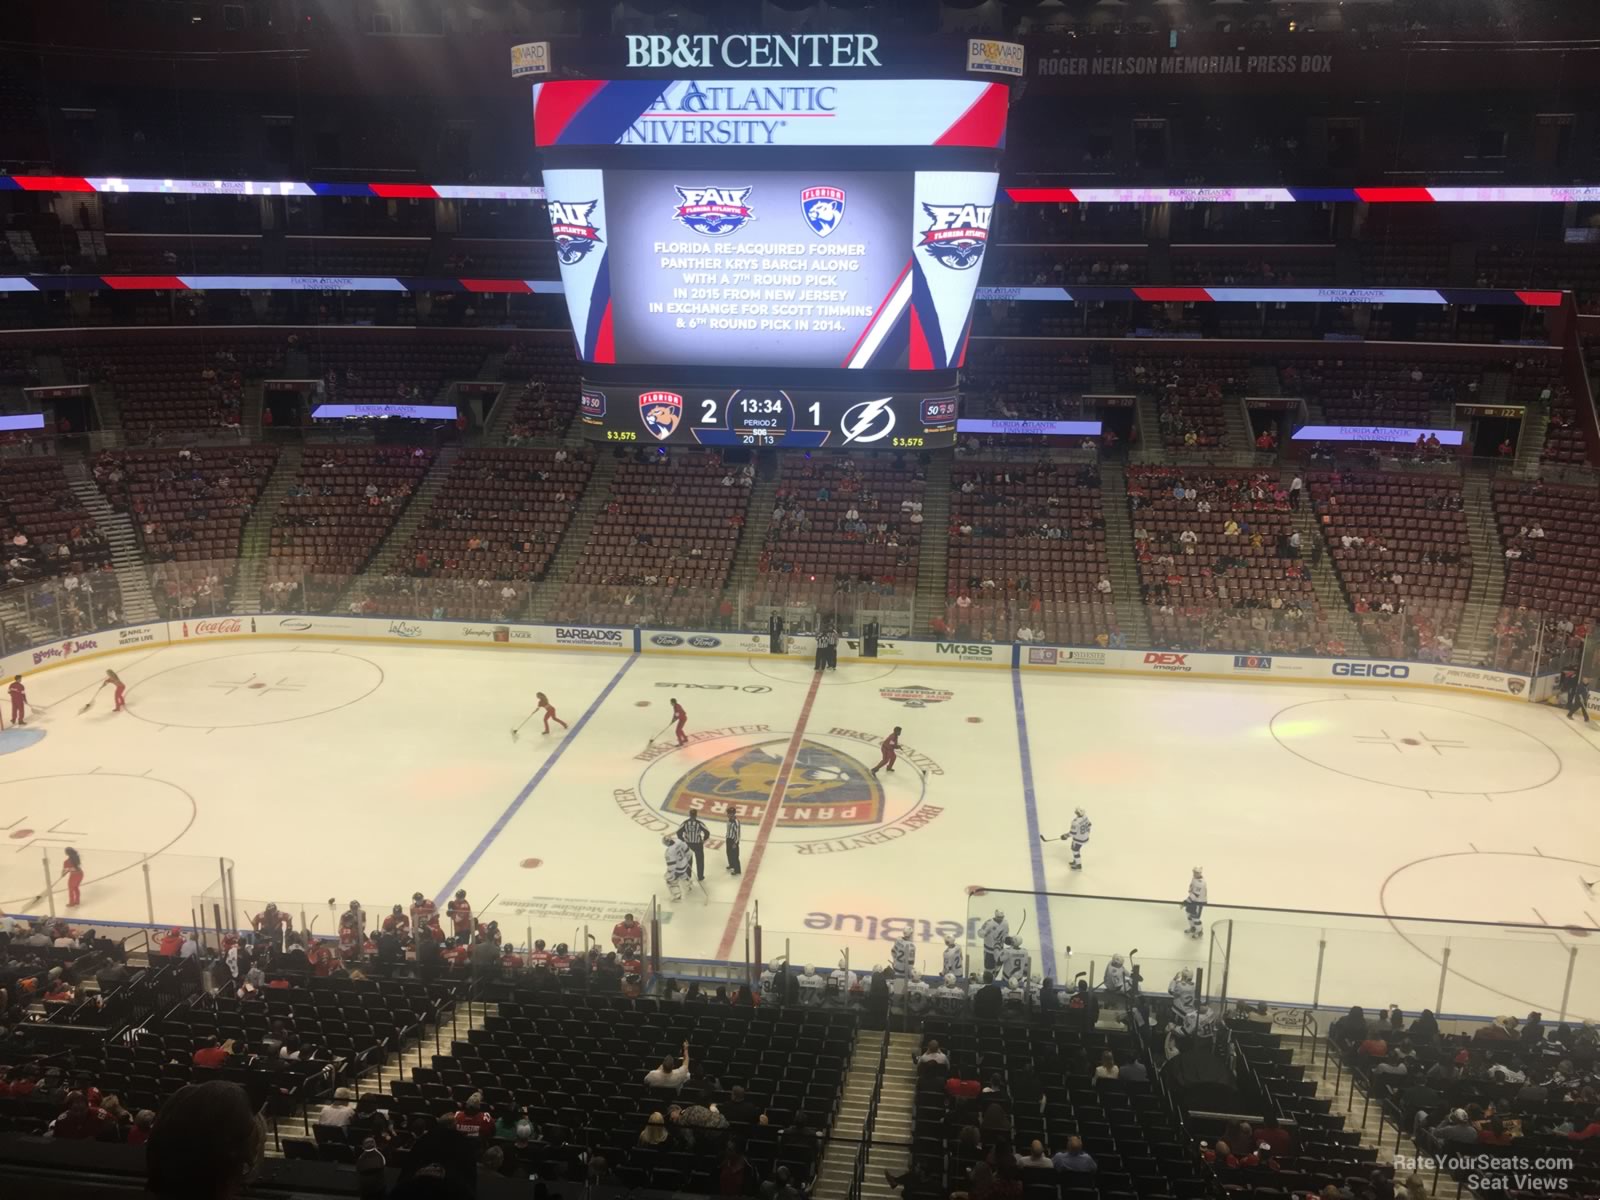 club 1, row 3 seat view  for hockey - fla live arena